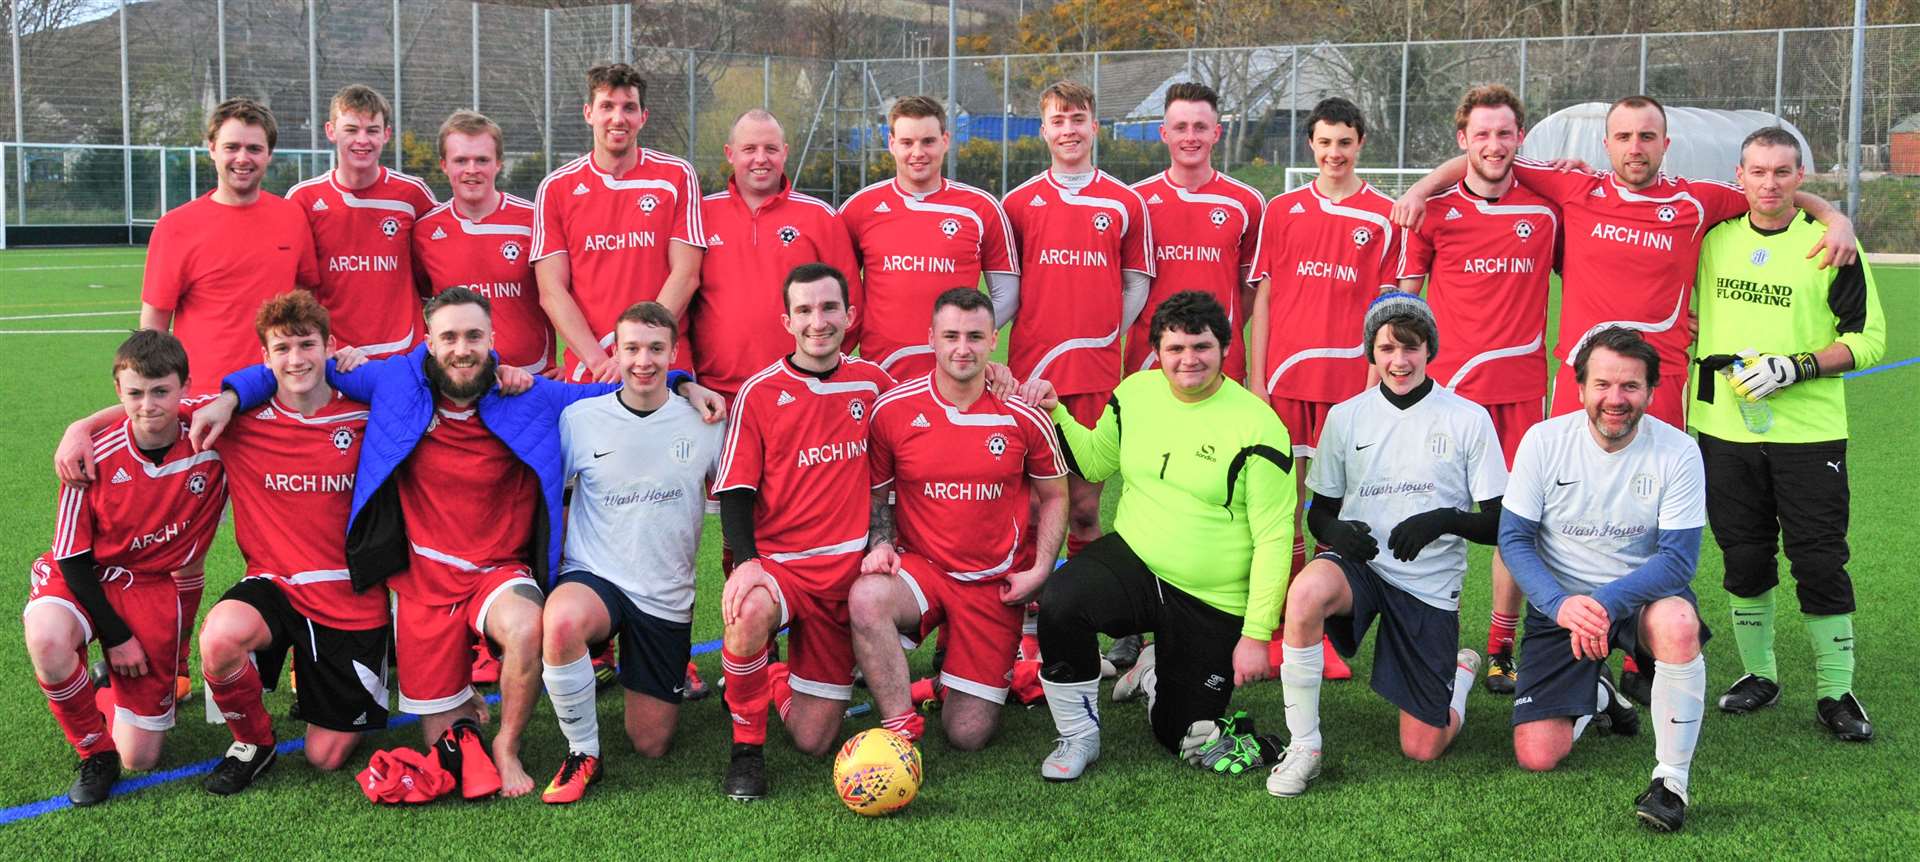 Lochbroom FC, pictured in 2018 after a friendly match with neighbouring Lochinver FC. Photo: Angus Bruce